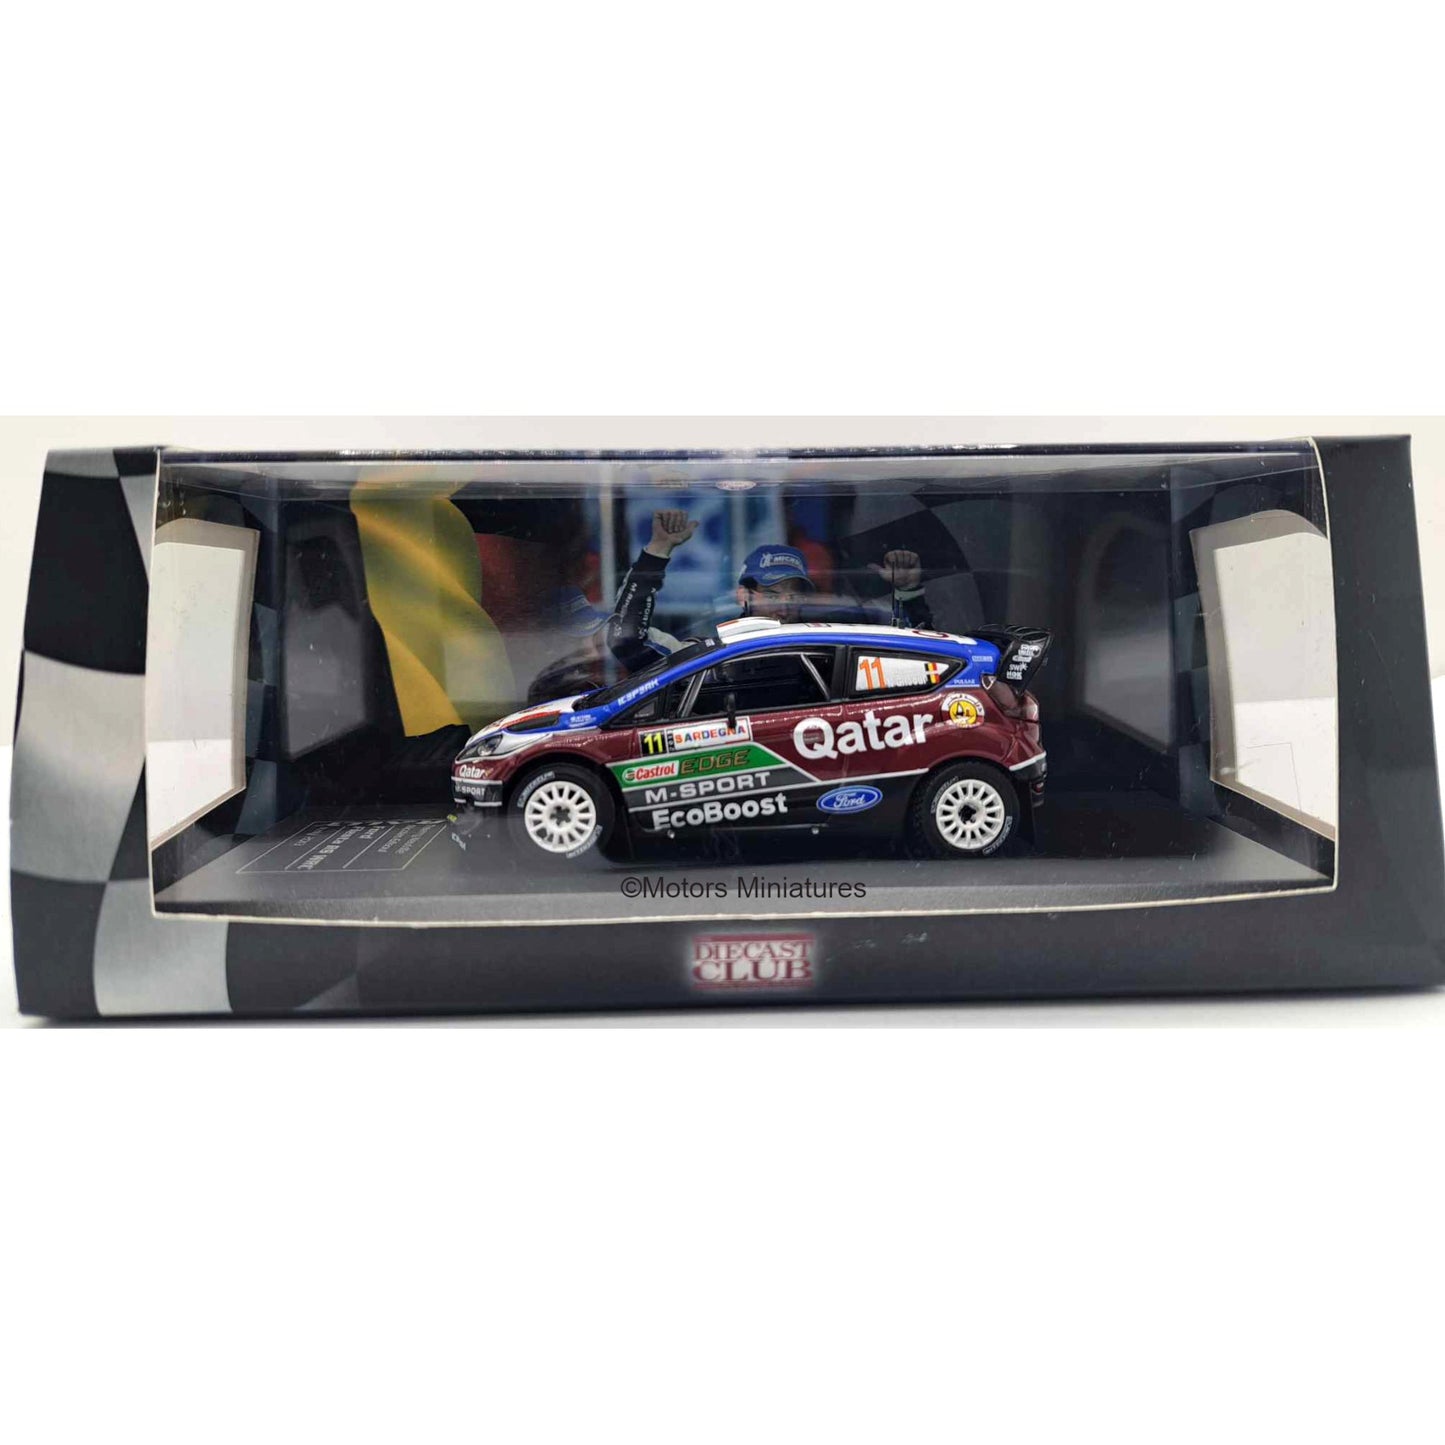 Ford Fiesta RS WRC #11 Neuville/Gilsoul Italy 2013 Magazine Models 1/43 - MagRfwp1402L13c03